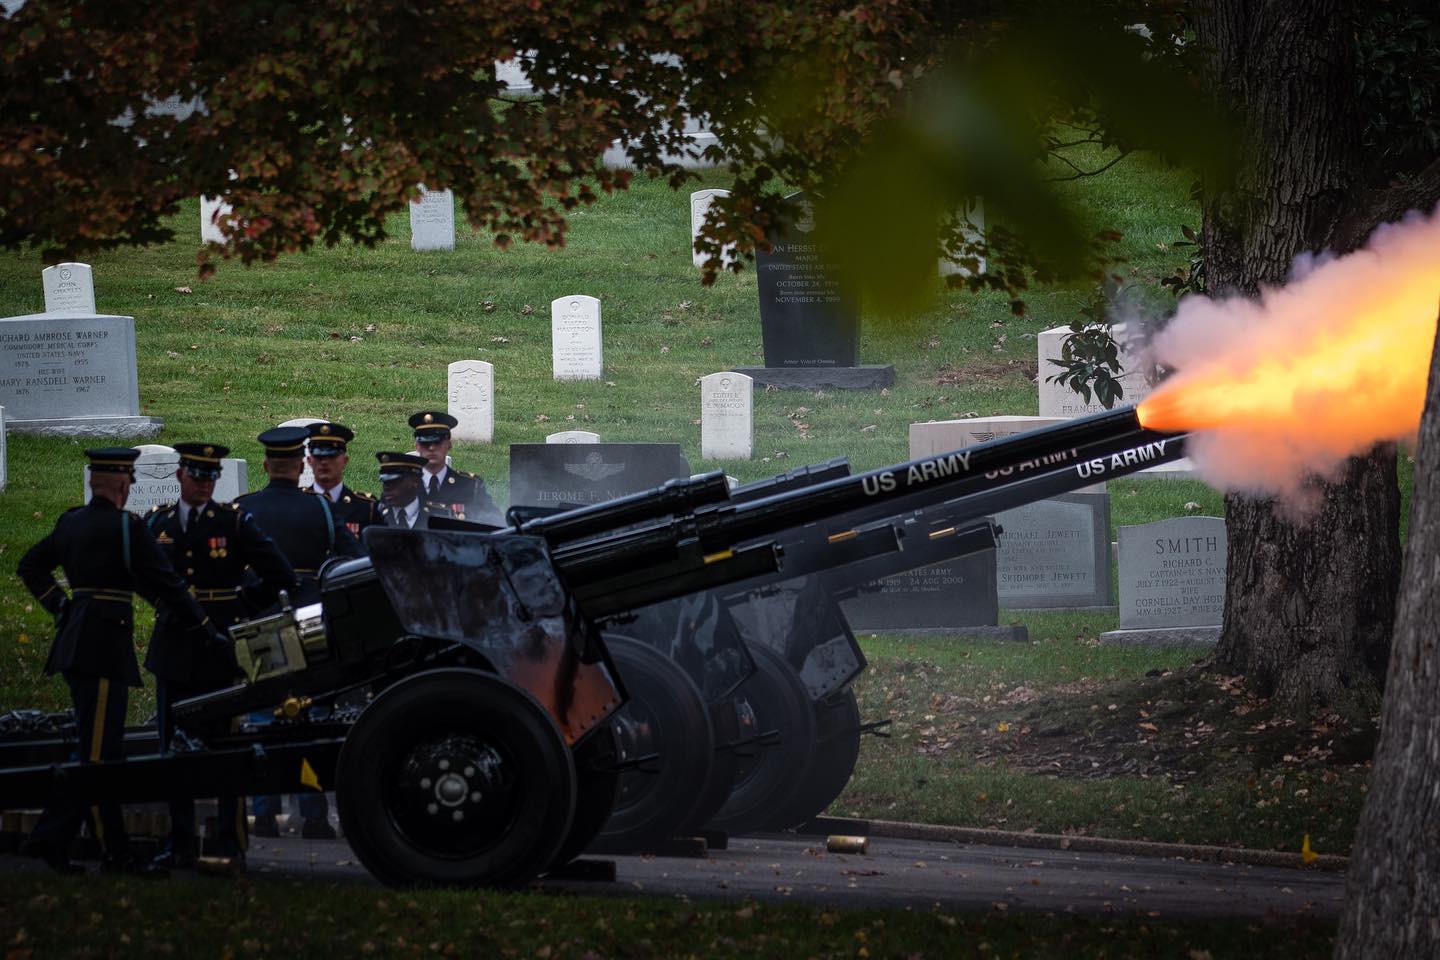 Shown here are the minute guns at Arlington National Cemetery, paying tribute to the career and life of a soldier receiving full honors at the cemetery.

Army general officers may receive a battery cannon salute (17 guns for a four-star general, 15 for a three-star, 13 for a two-star, 11 for a one-star), if available. 

Minute guns may be used for general officers/flag officers of the Coast Guard, Marine Corps and Navy, if available. 

The President of the United States is entitled to a 21-gun salute, while other high state officials receive 19 guns.